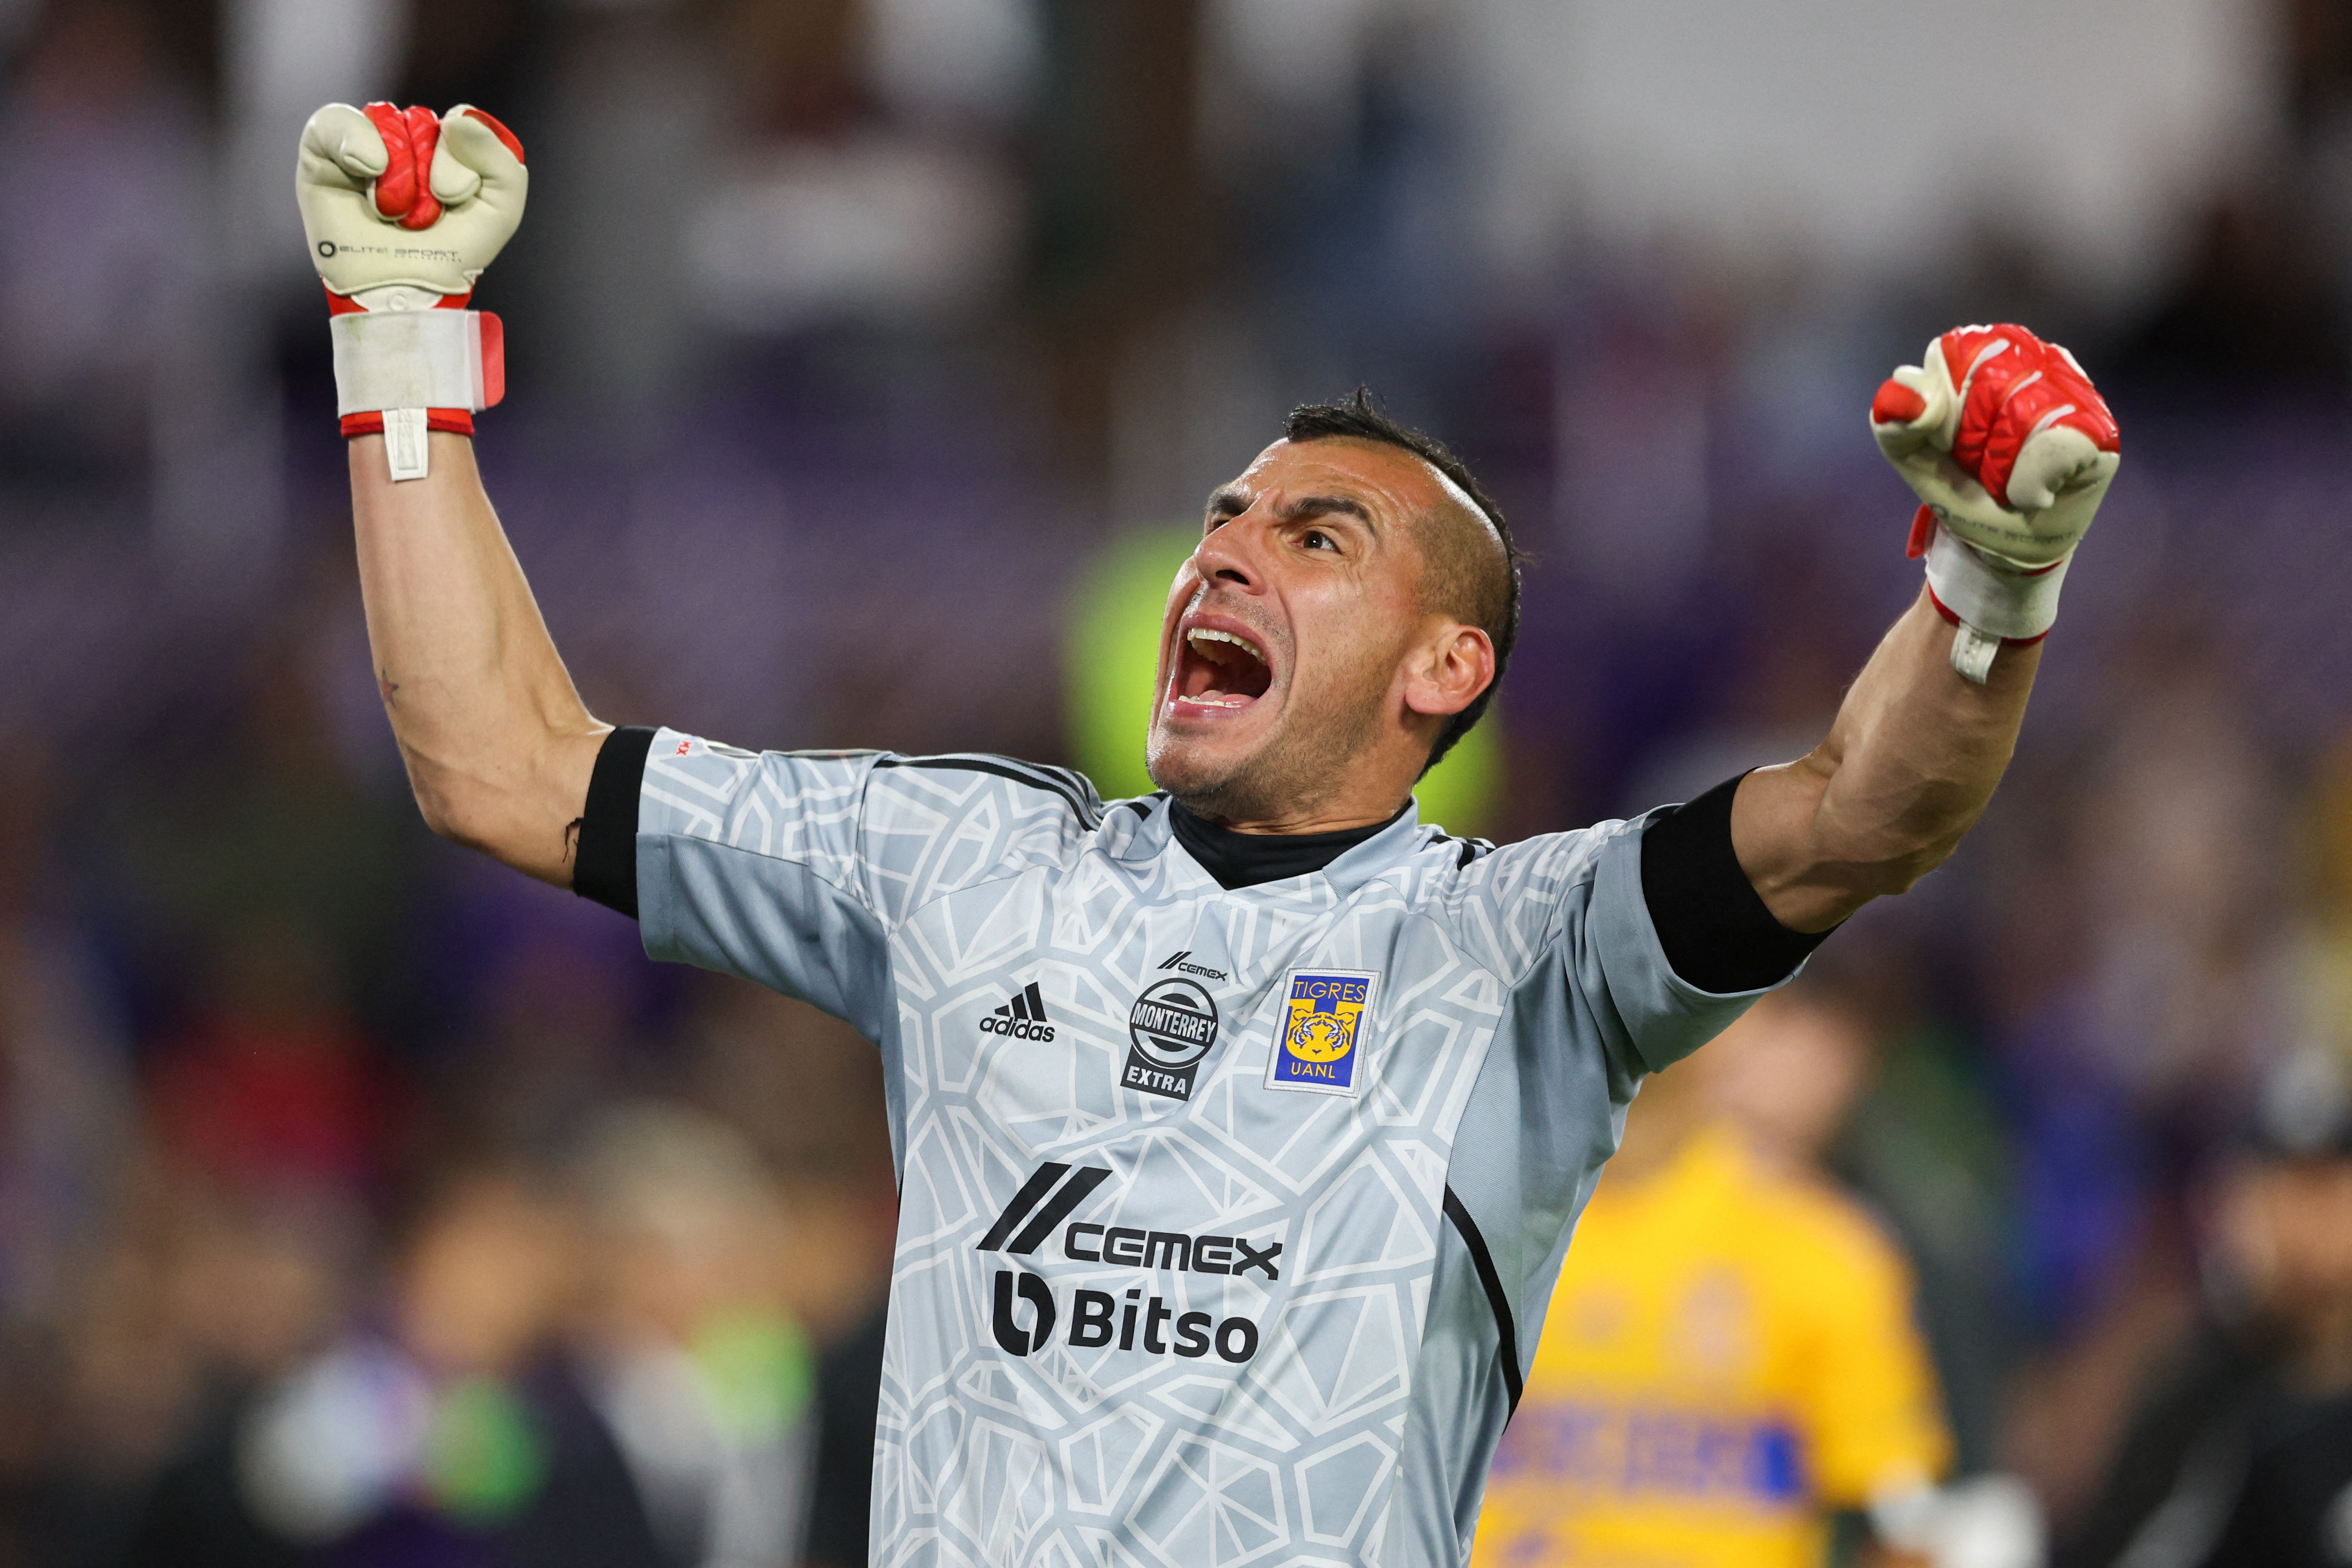 Mar 15, 2023; Orlando, FL, USA;   Tigres UANL goalkeeper Nahuel Guzman (1) celebrates after drawing Orlando City SC to move on to the next round during the CONCACAF Champions League at Exploria Stadium. Mandatory Credit: Nathan Ray Seebeck-USA TODAY Sports